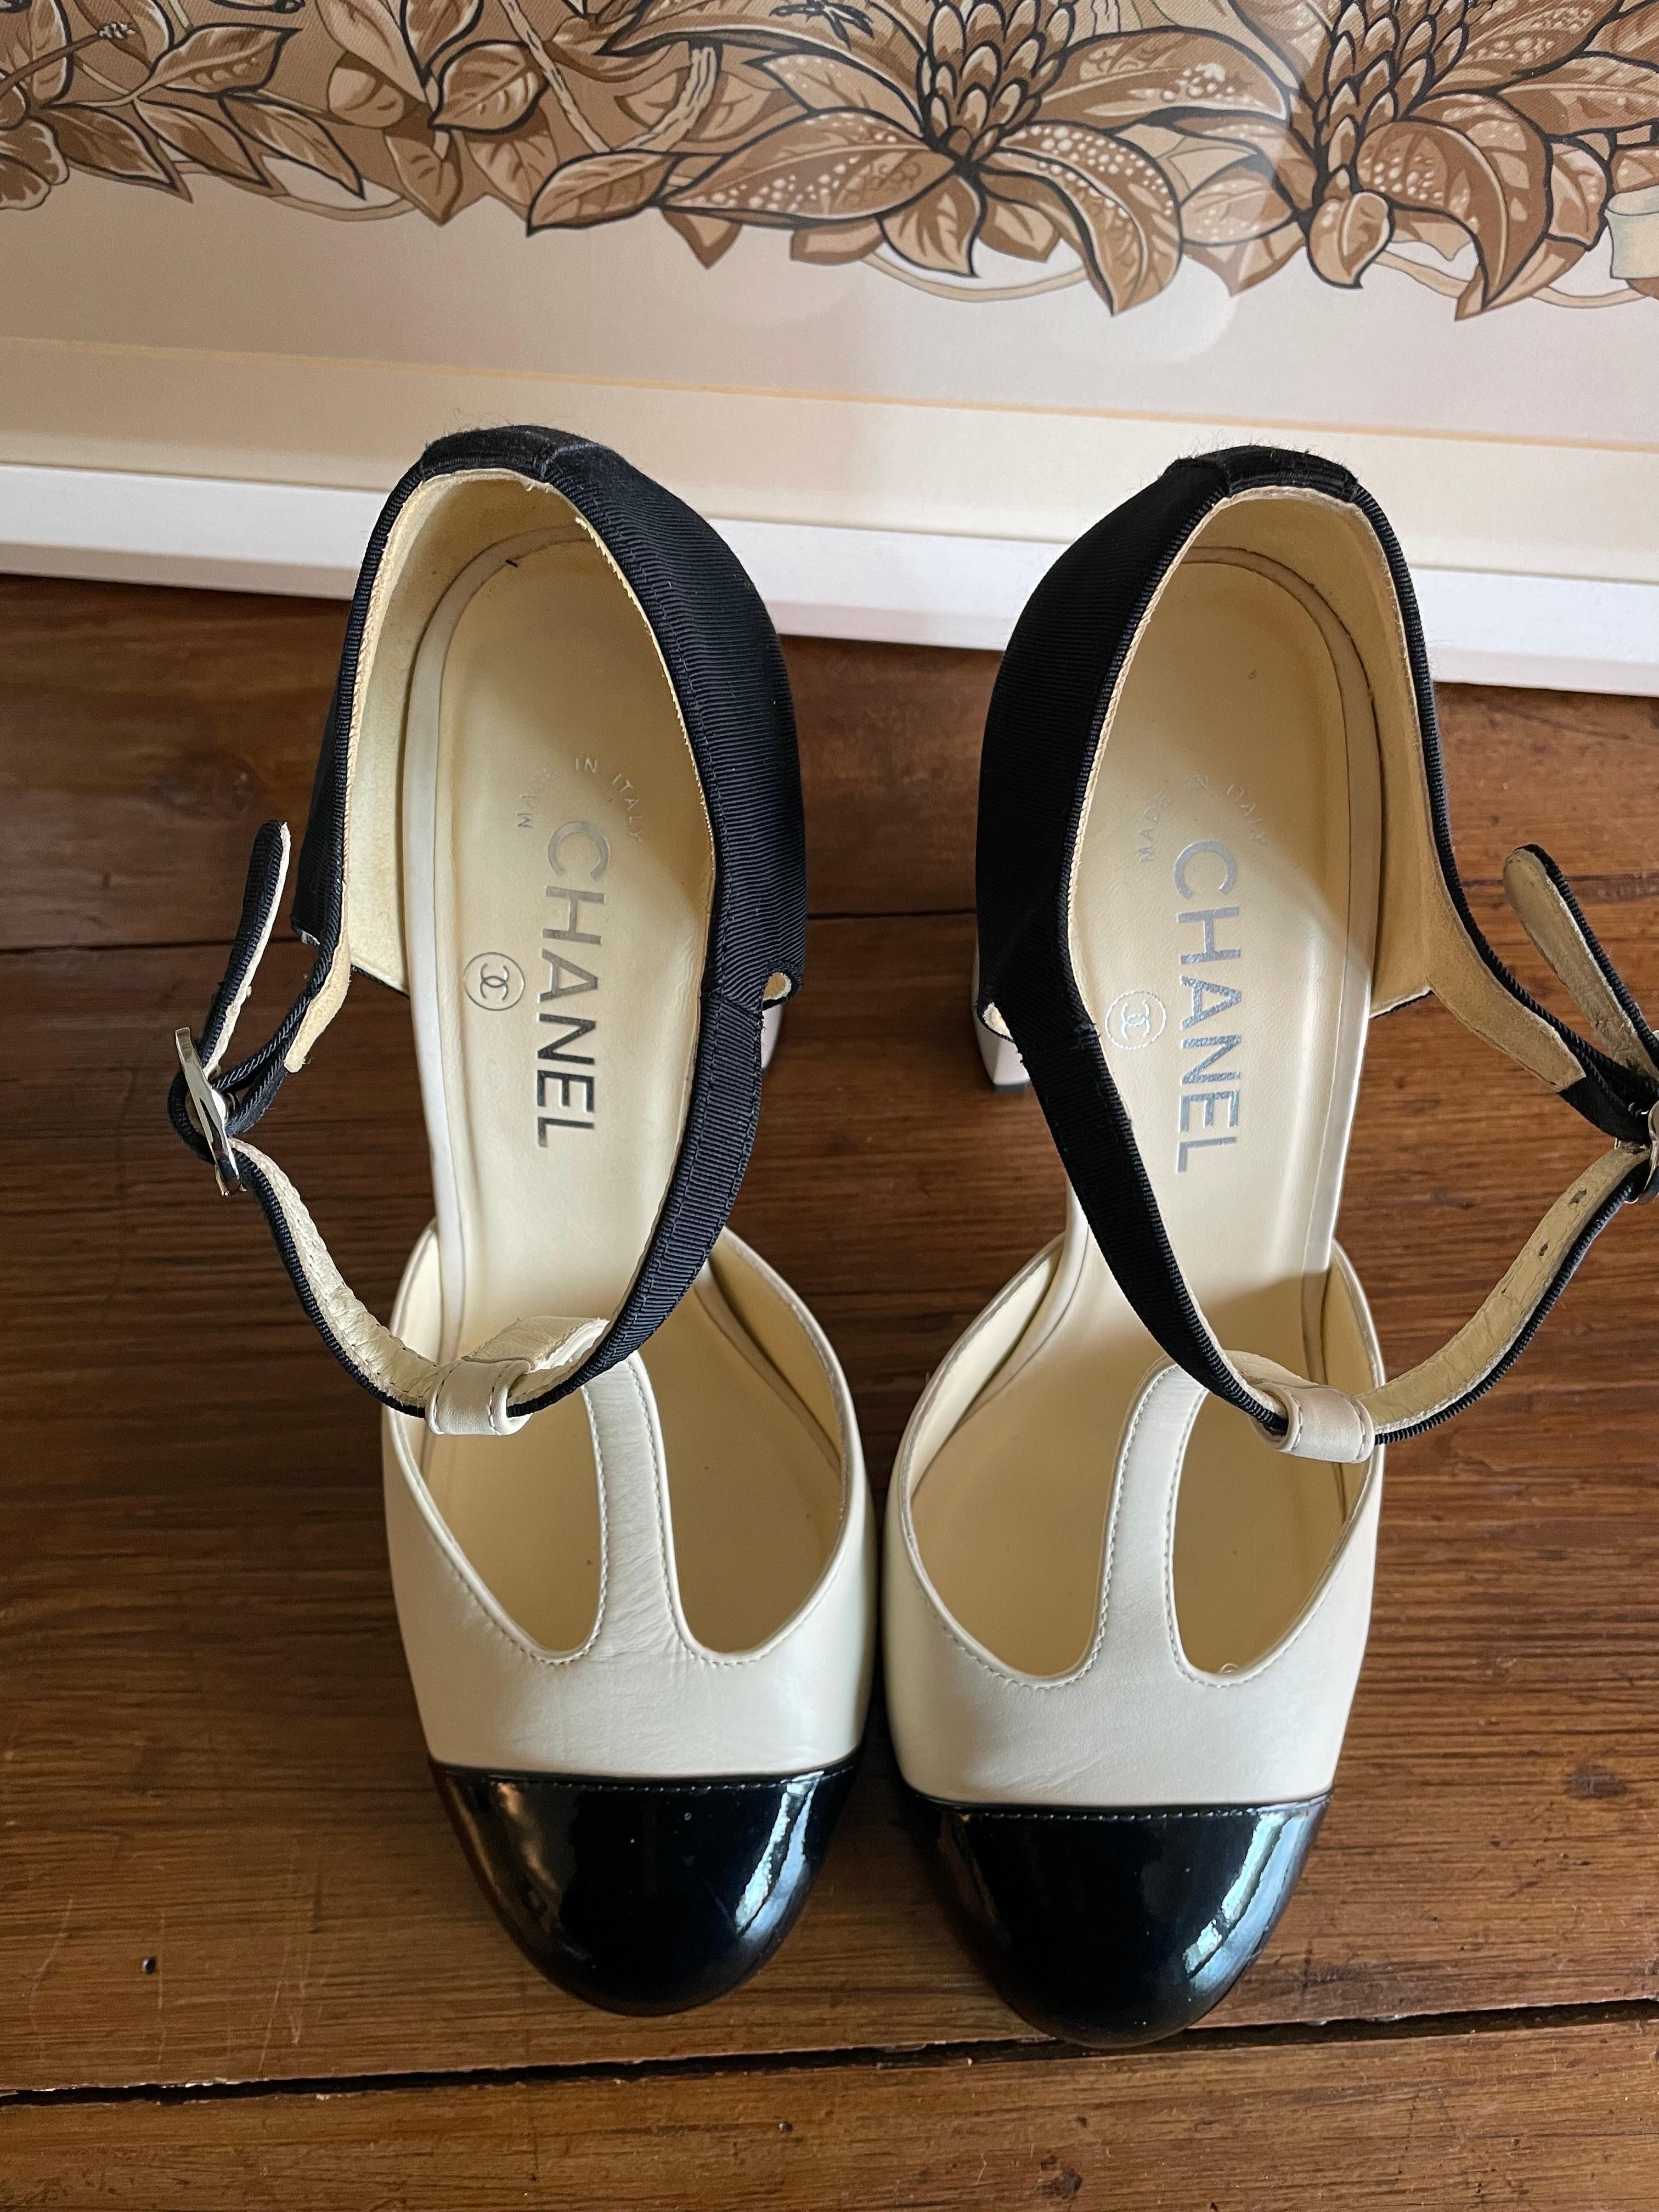 Mary Jane Chanel in light beige leather with black patent leather toe and black satin detail on the back. Adjustable ankle strap. Leather chain detail on the heel. Number 39. 
Heel 10 cm. With original dust. 
It has some signs of use but is well